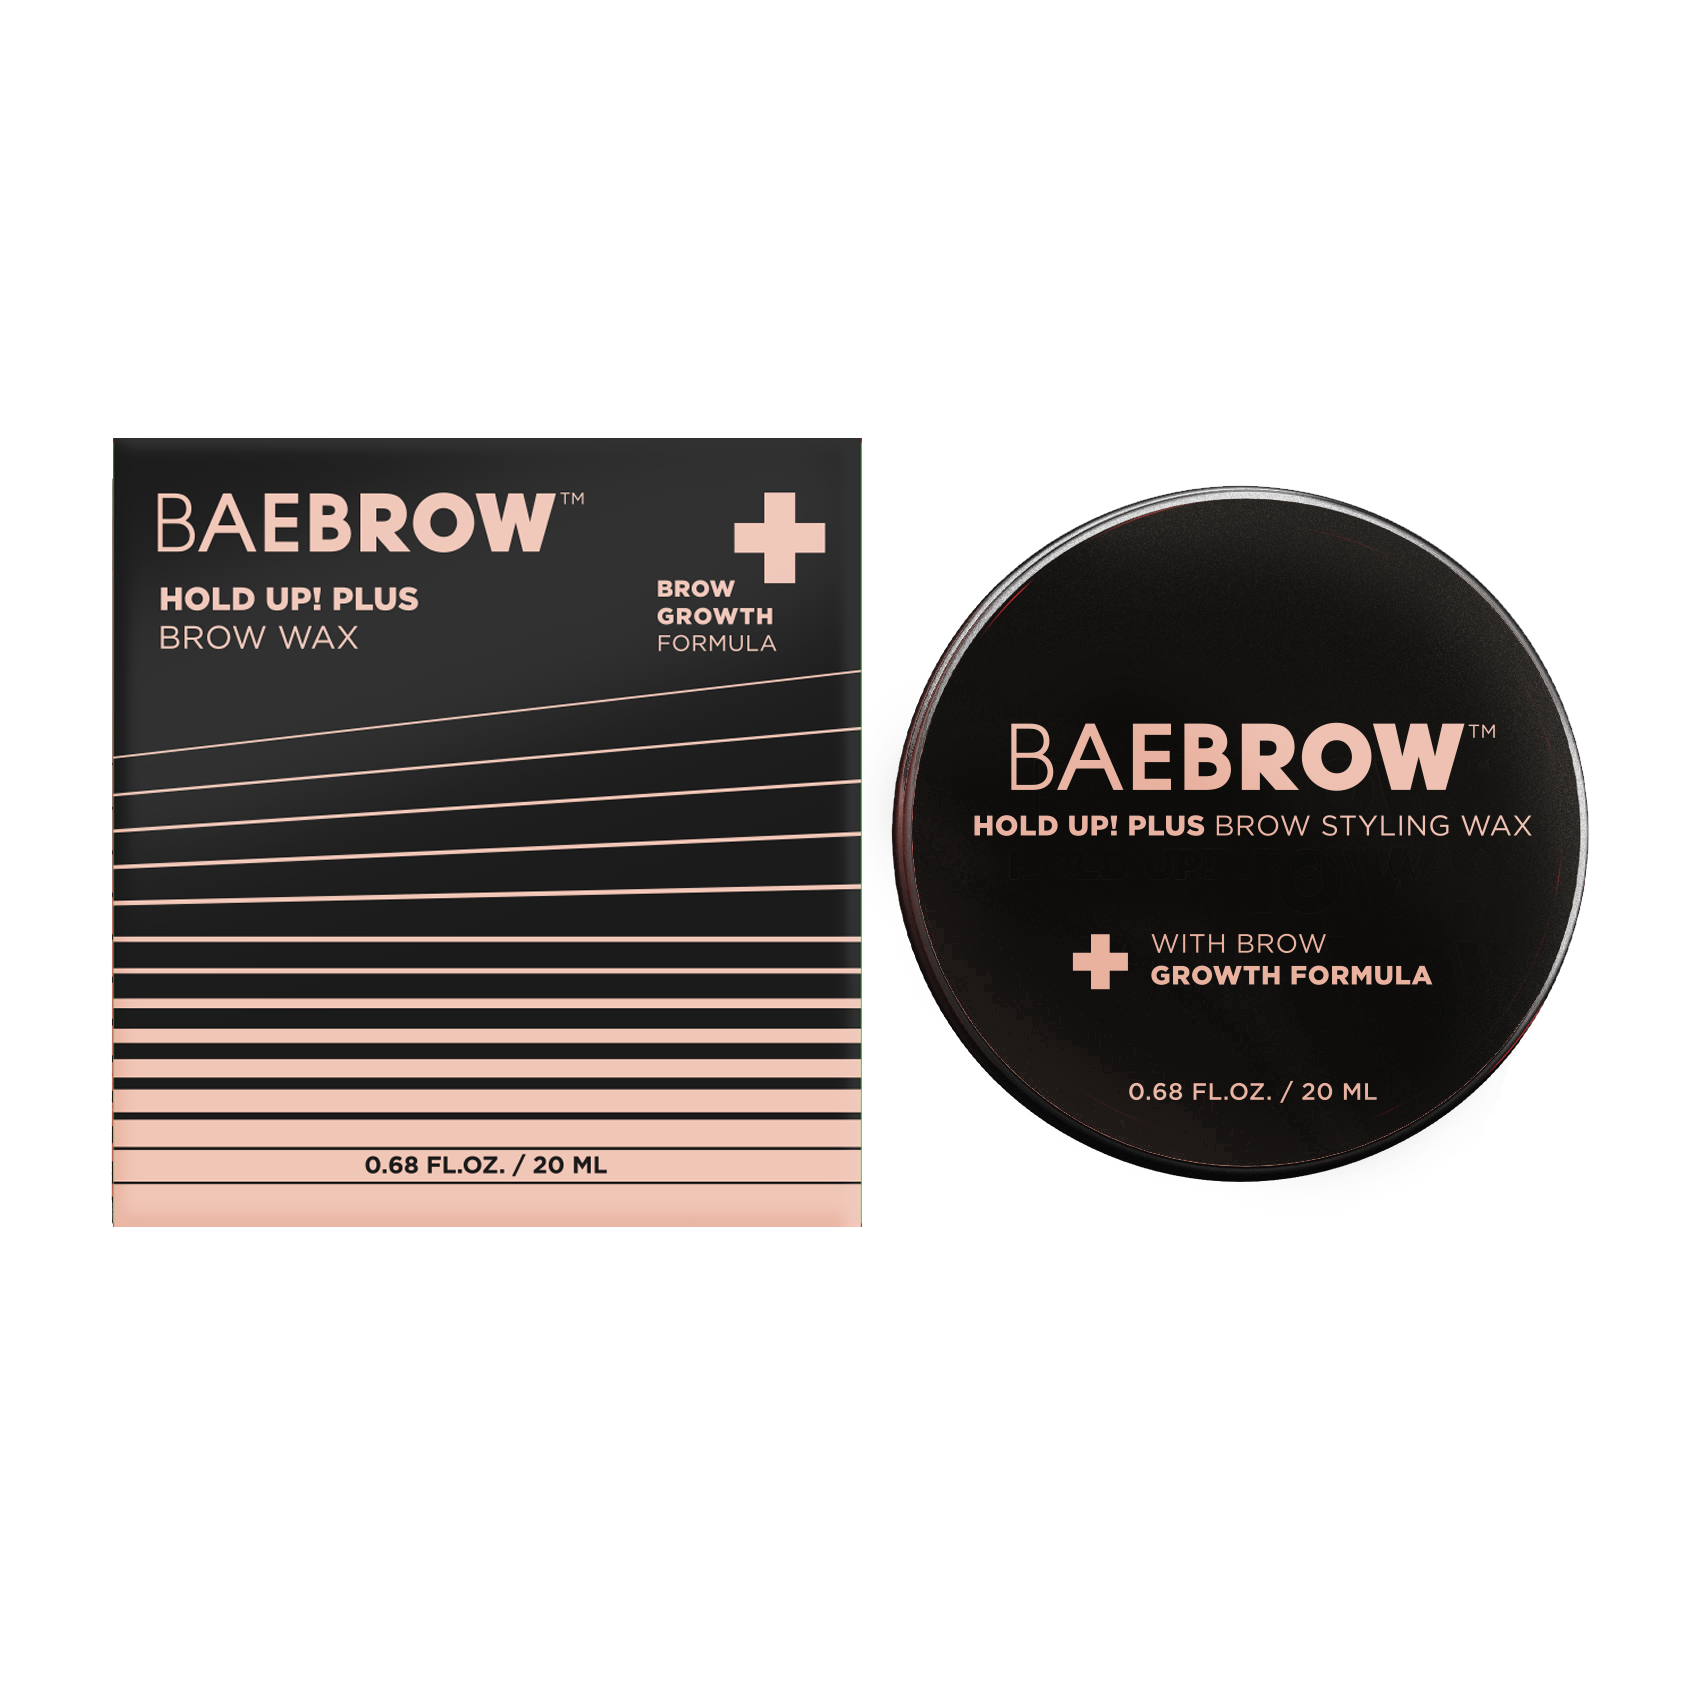 HOLD UP! PLUS Brow Wax is a new, unscented version which includes a powerful brow growth formula. Infused with nourishing ingredients like Biotinoyl Tripeptide-1, it doesn't just style - it nurtures and grows your brows over time